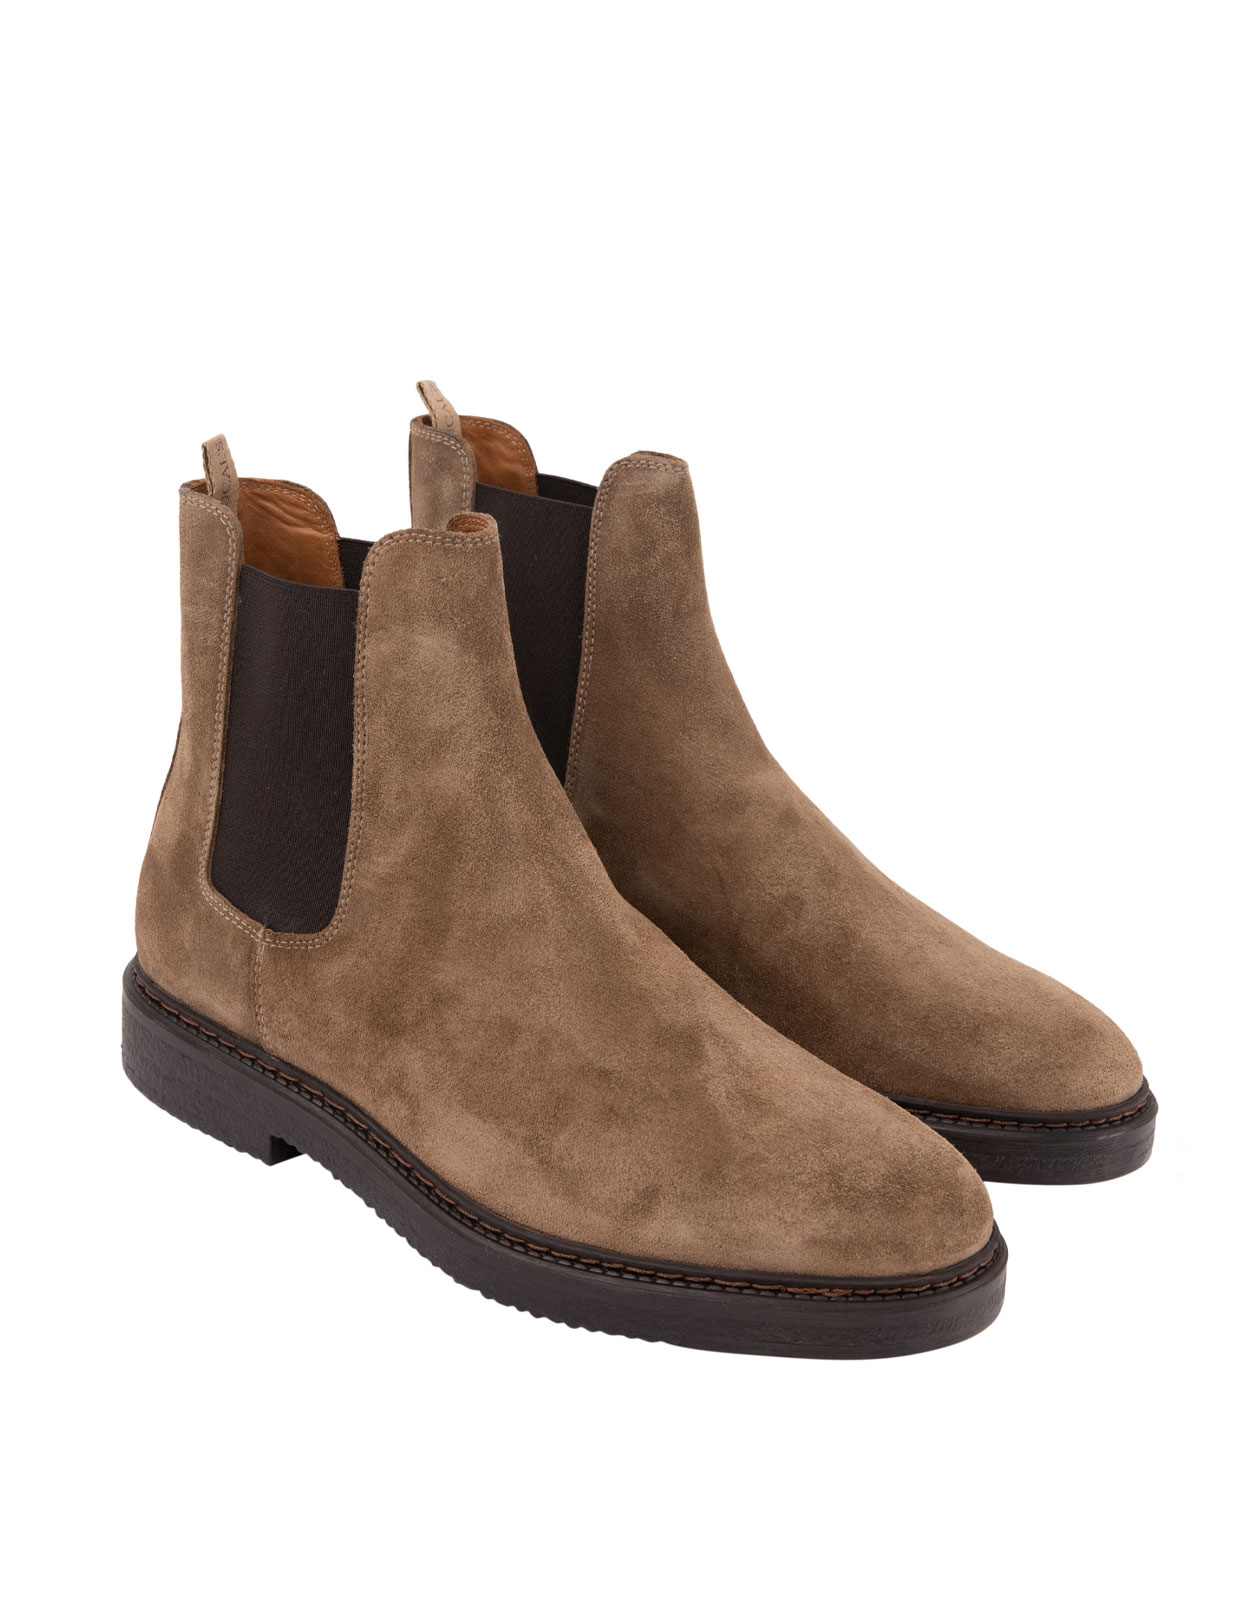 Chelsea Boots Tabacco Stl 43